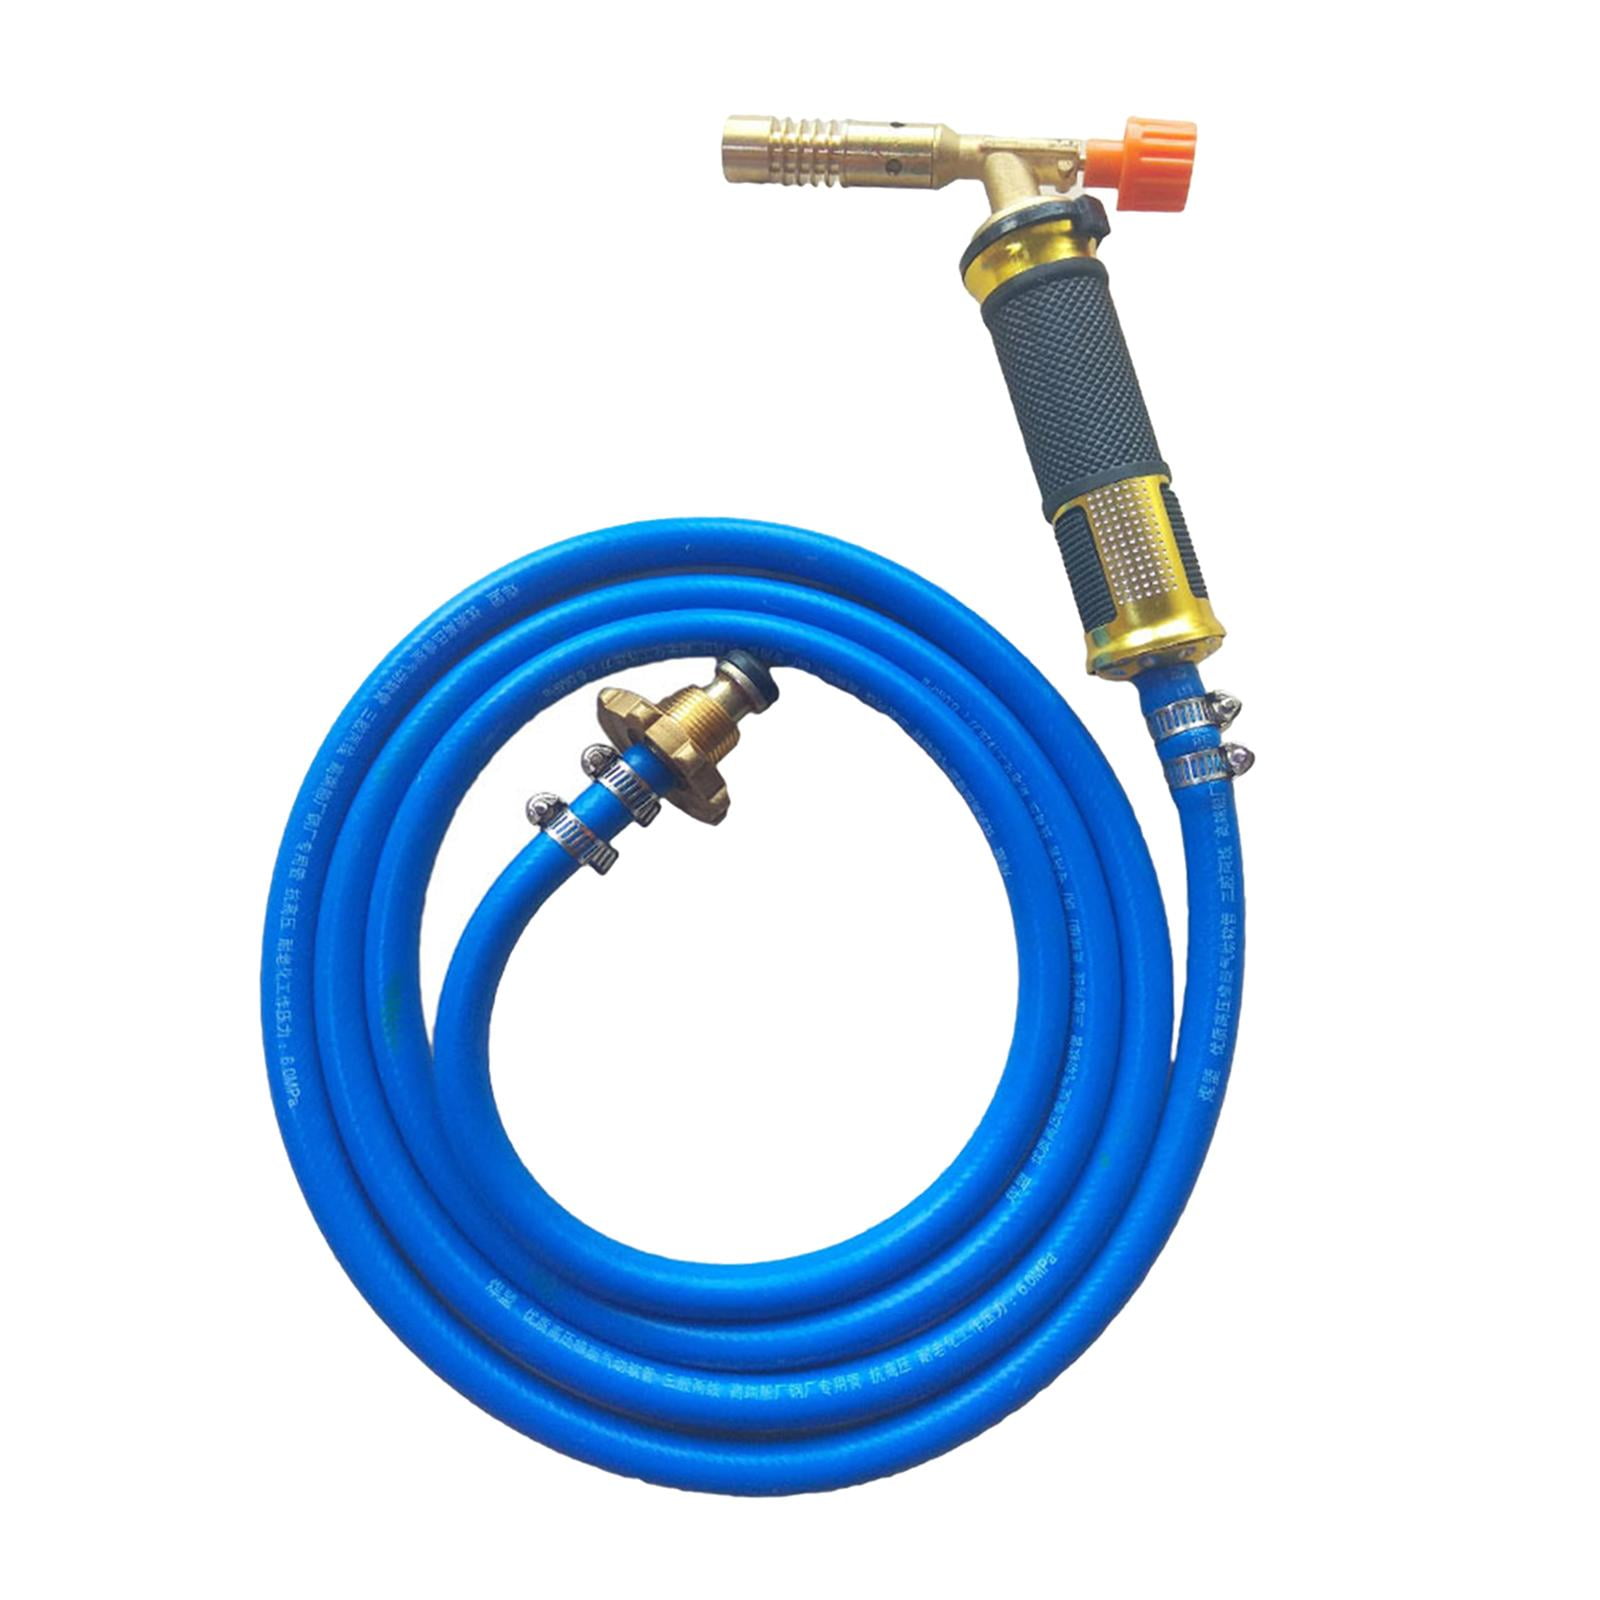 Liquefied Gas Welding Torch Kit With 2.5M Hose for Soldering Propane Cooking 